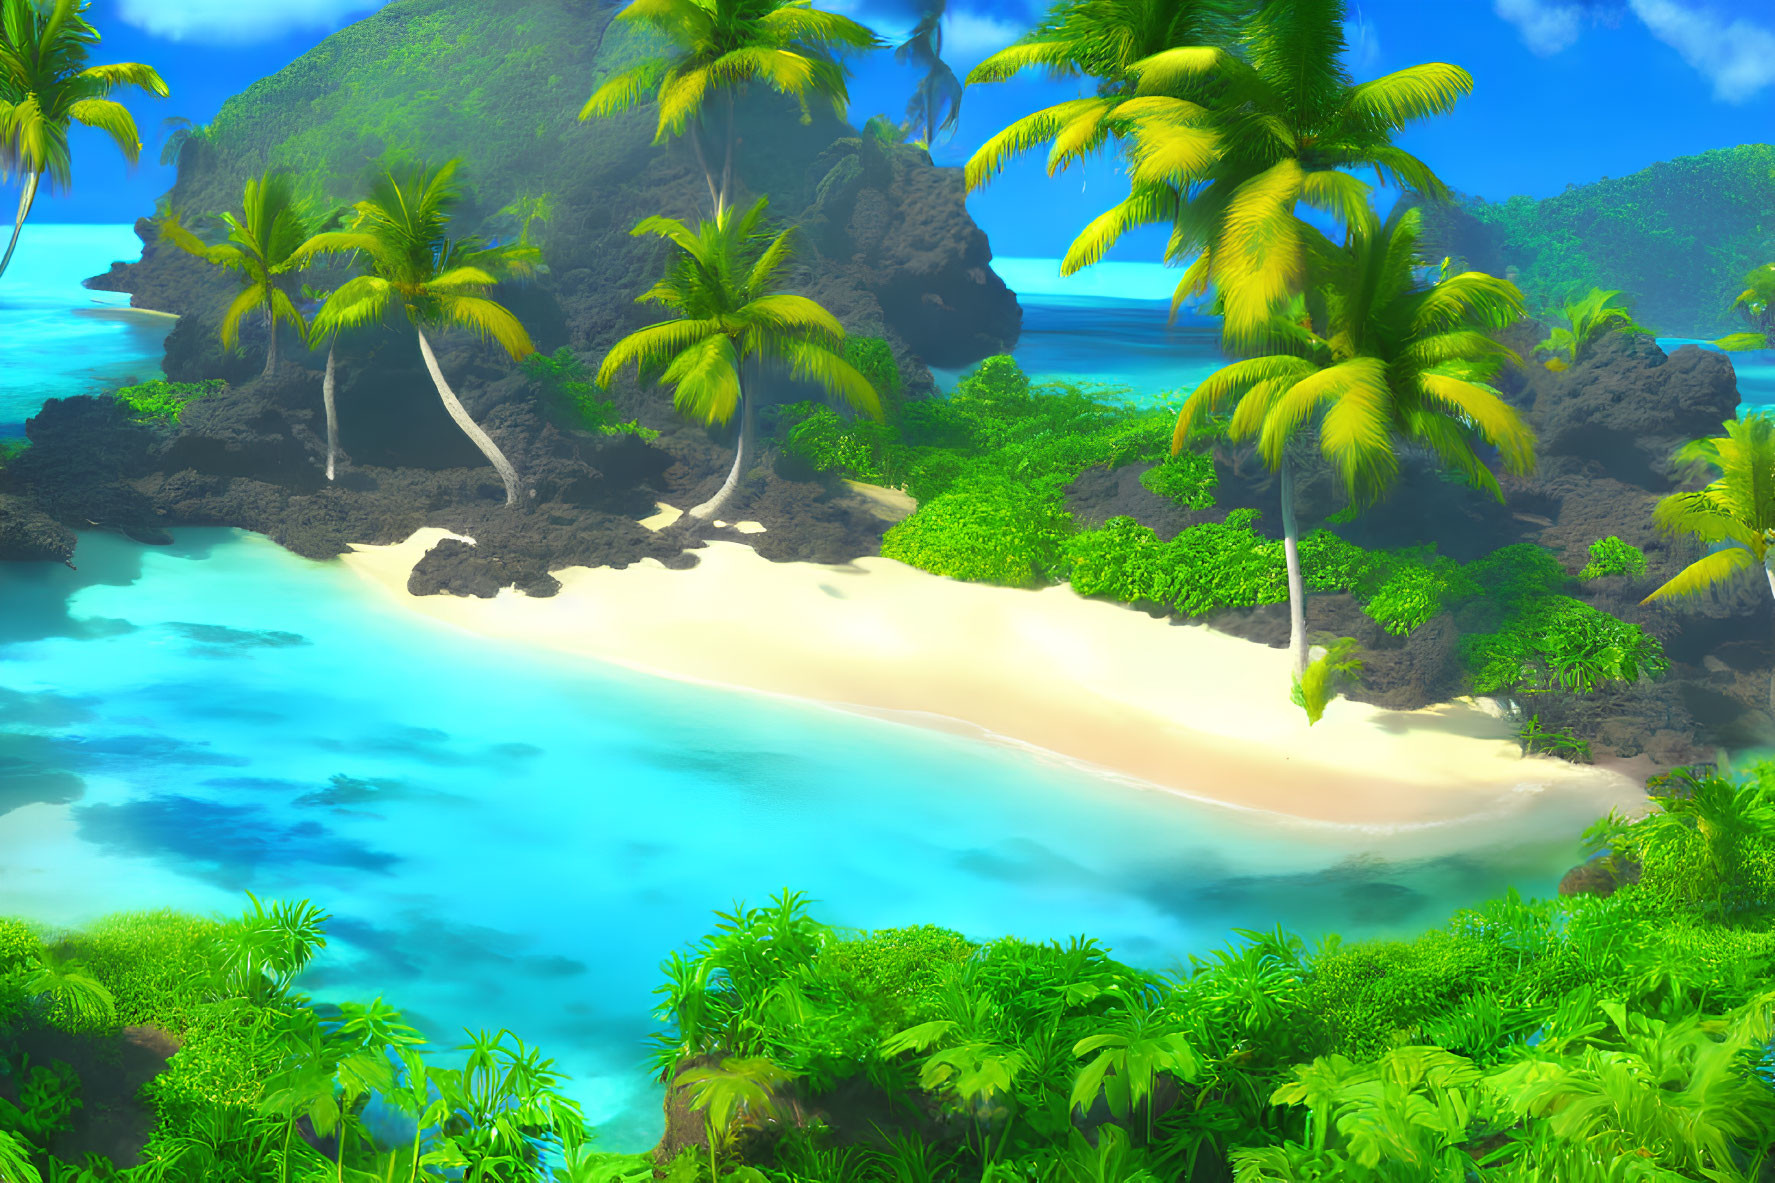 Tropical Beach Scene with Palm Trees, Blue Water, White Sand, and Rocks